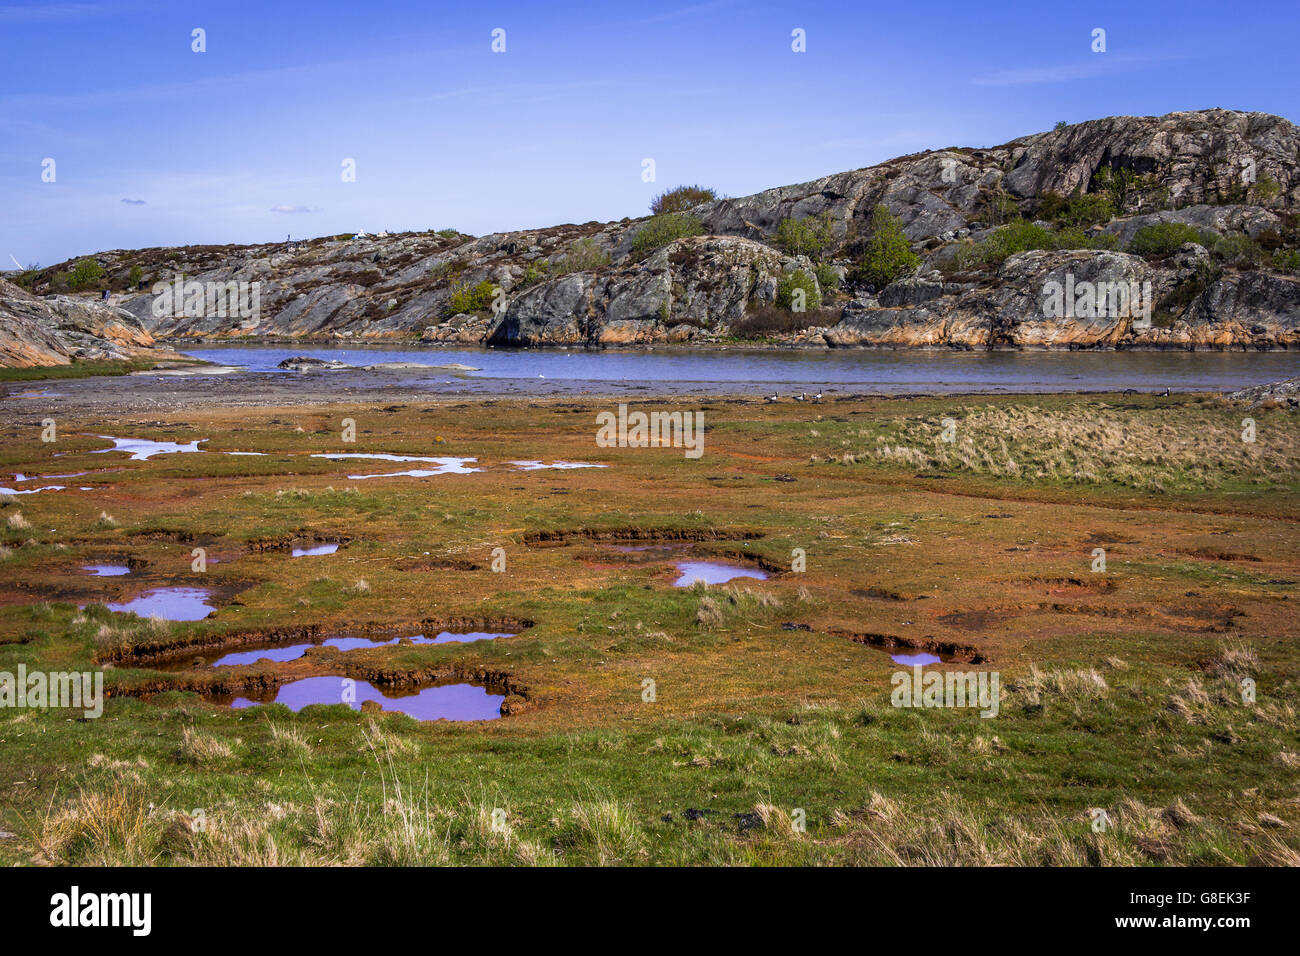 Lovely Islands with beautiful -Gothenburg, Sweden Photo - Alamy